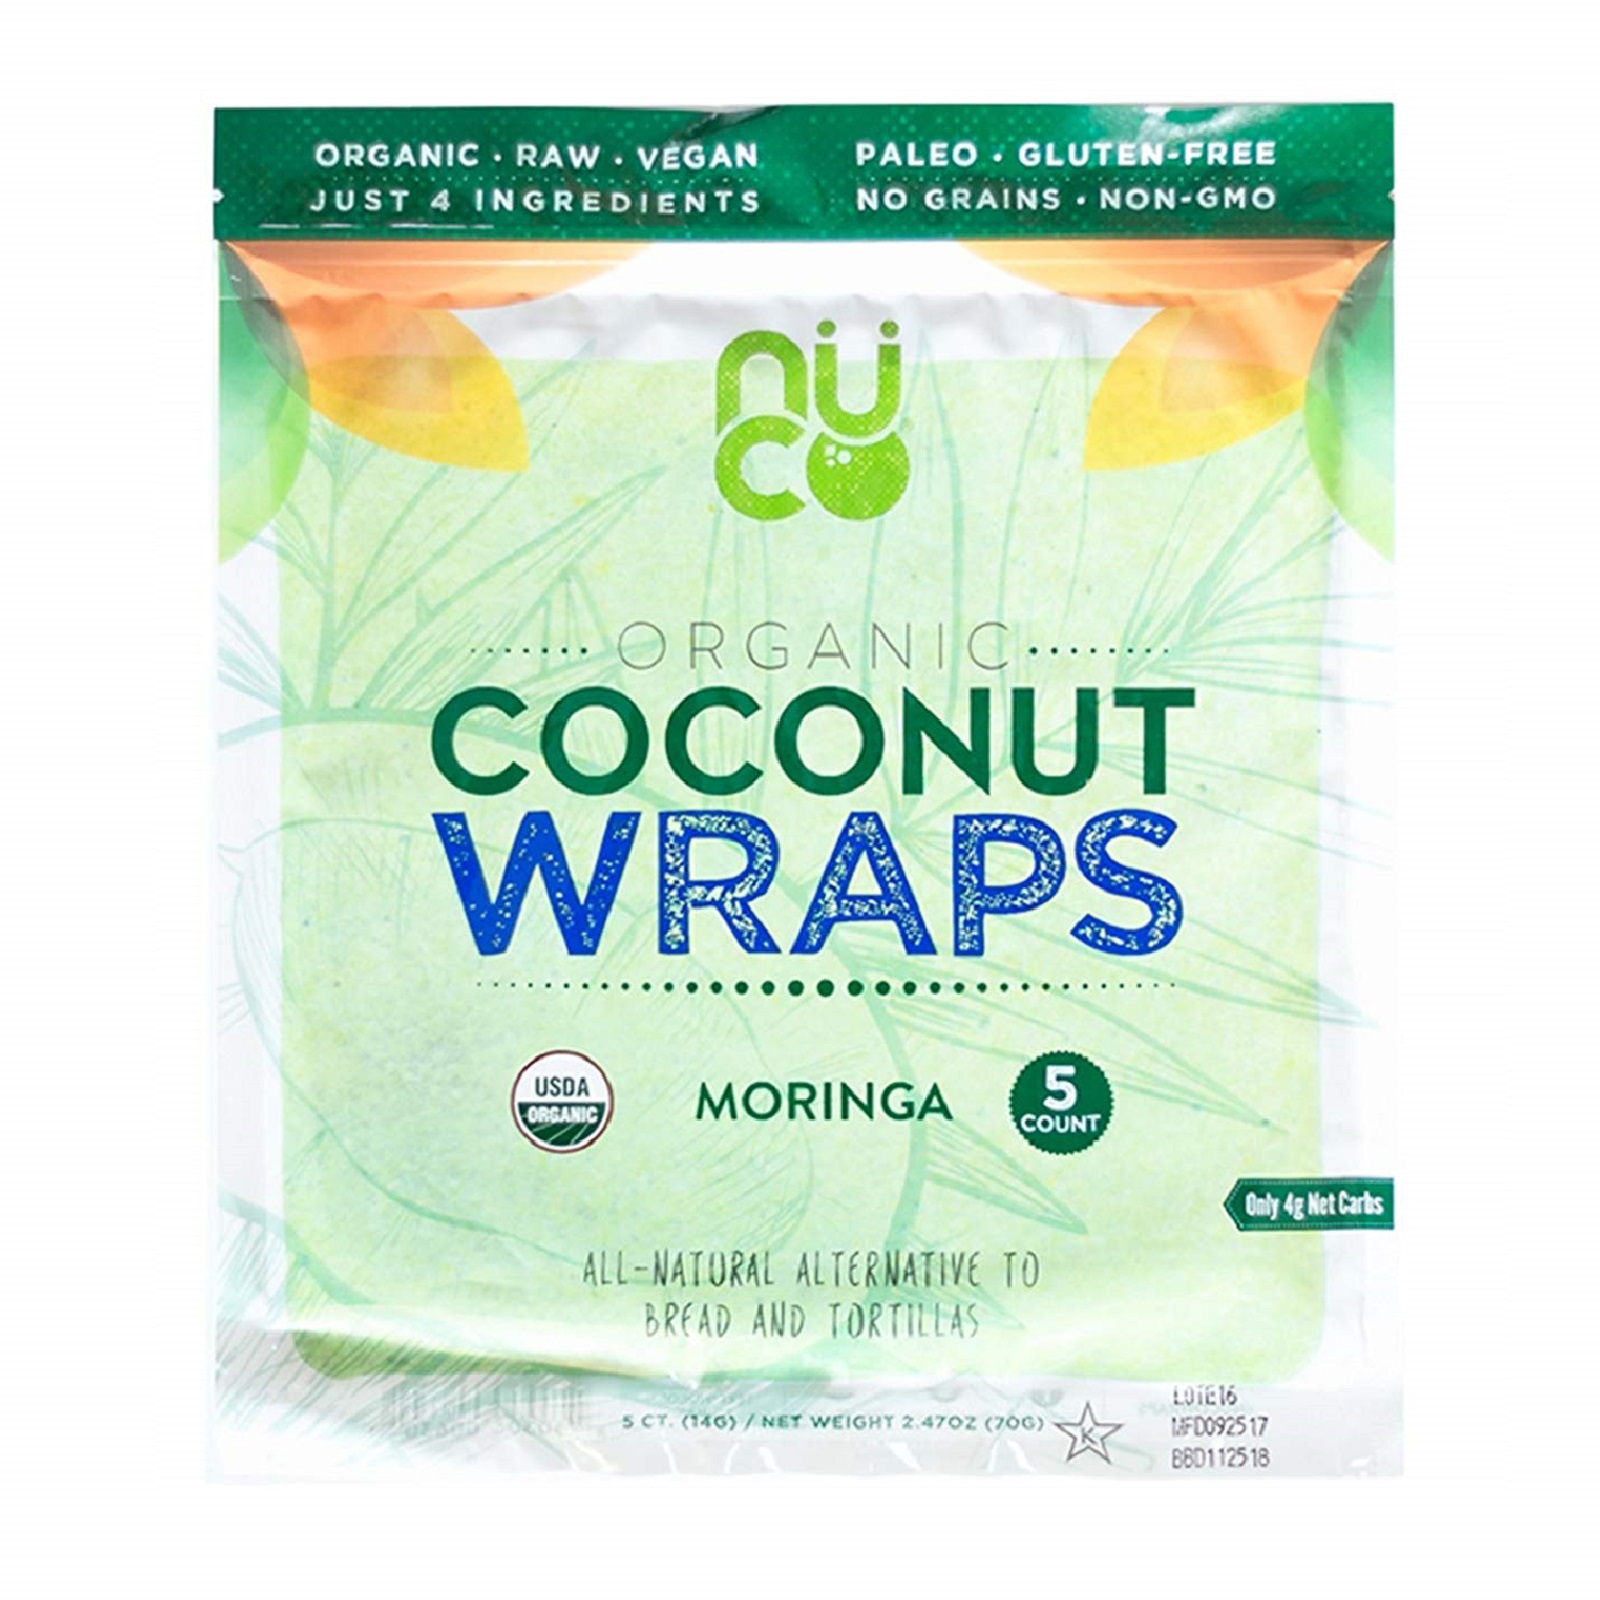 Looking to Buy NuCo Coconut Wraps. : Discover Where to Get These Tasty Wraps Near You